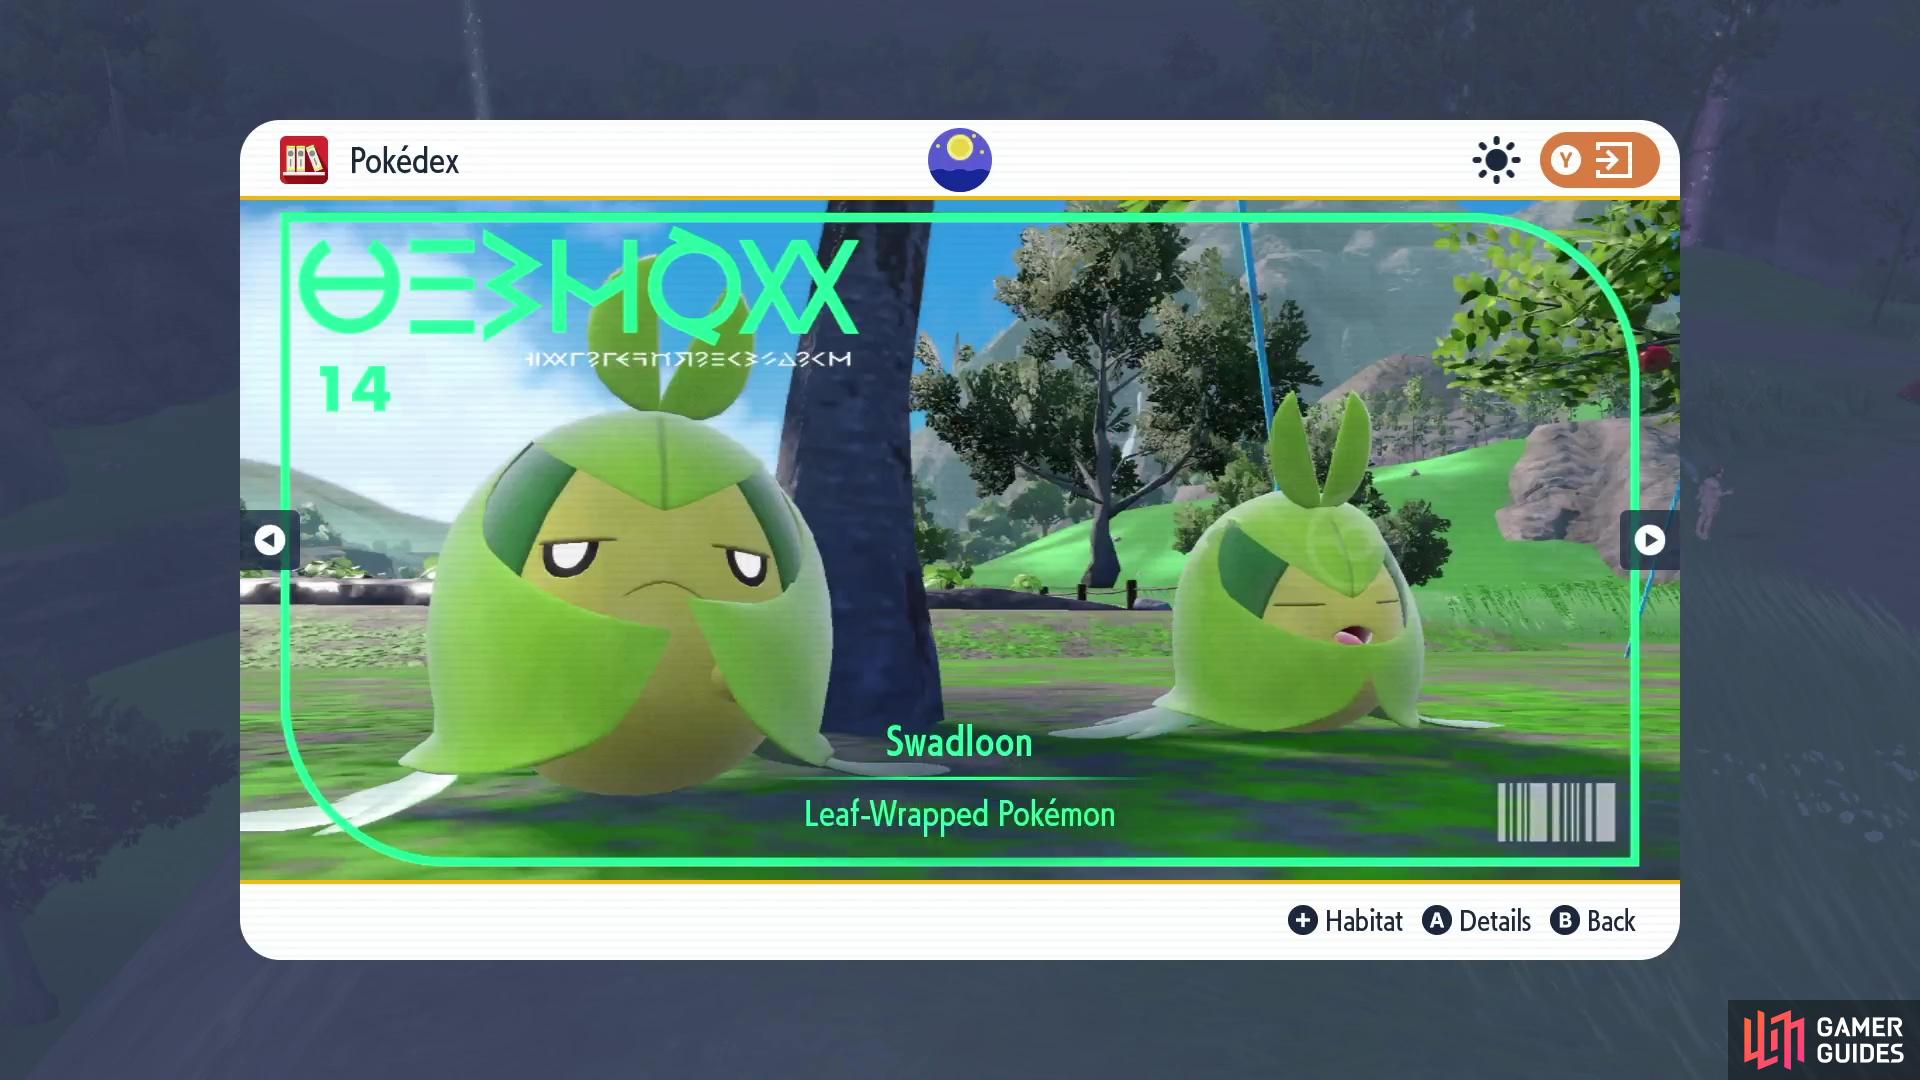 Austin John Plays on X: What Does Wild Shiny Ditto Look Like in Pokemon  scarlet and Violet?   / X